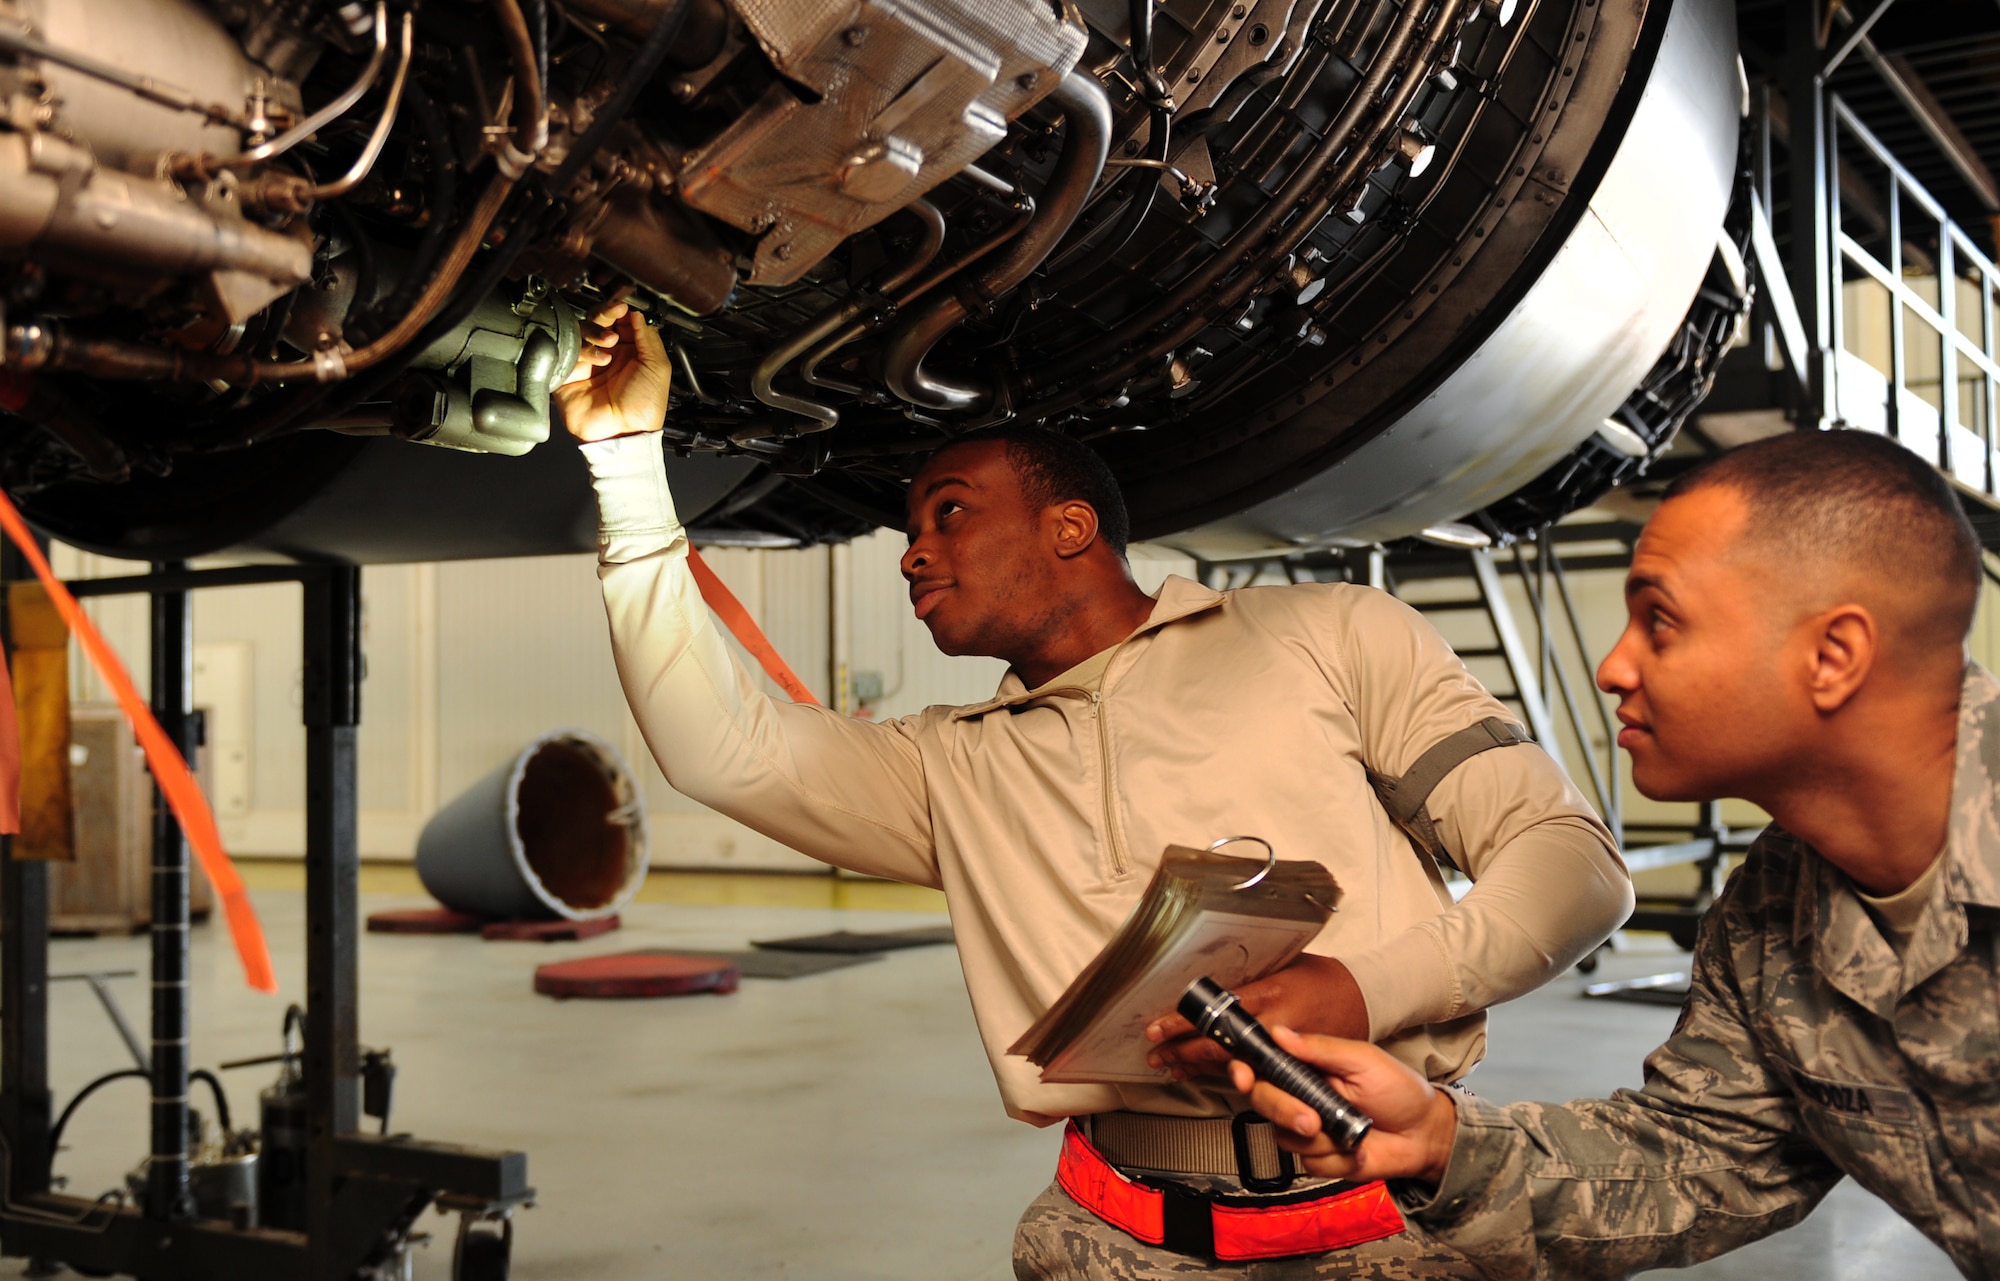 U.S. Air Force Senior Airman Chris Alston, left, and Staff Sgt. Danel Mendoza, 7th Equipment Maintenance Squadron, inspect a F101-102 engine of a B-1B Lancer for leaks or damage Nov. 8, 2013, at Dyess Air Force Base, Texas. Inspecting for leaks is one of many virtual tasks performed by 7 EMS Airman, to ensure aircraft are safe for flight. (U.S. Air Force photo by Senior Airman Kia Atkins/Released)